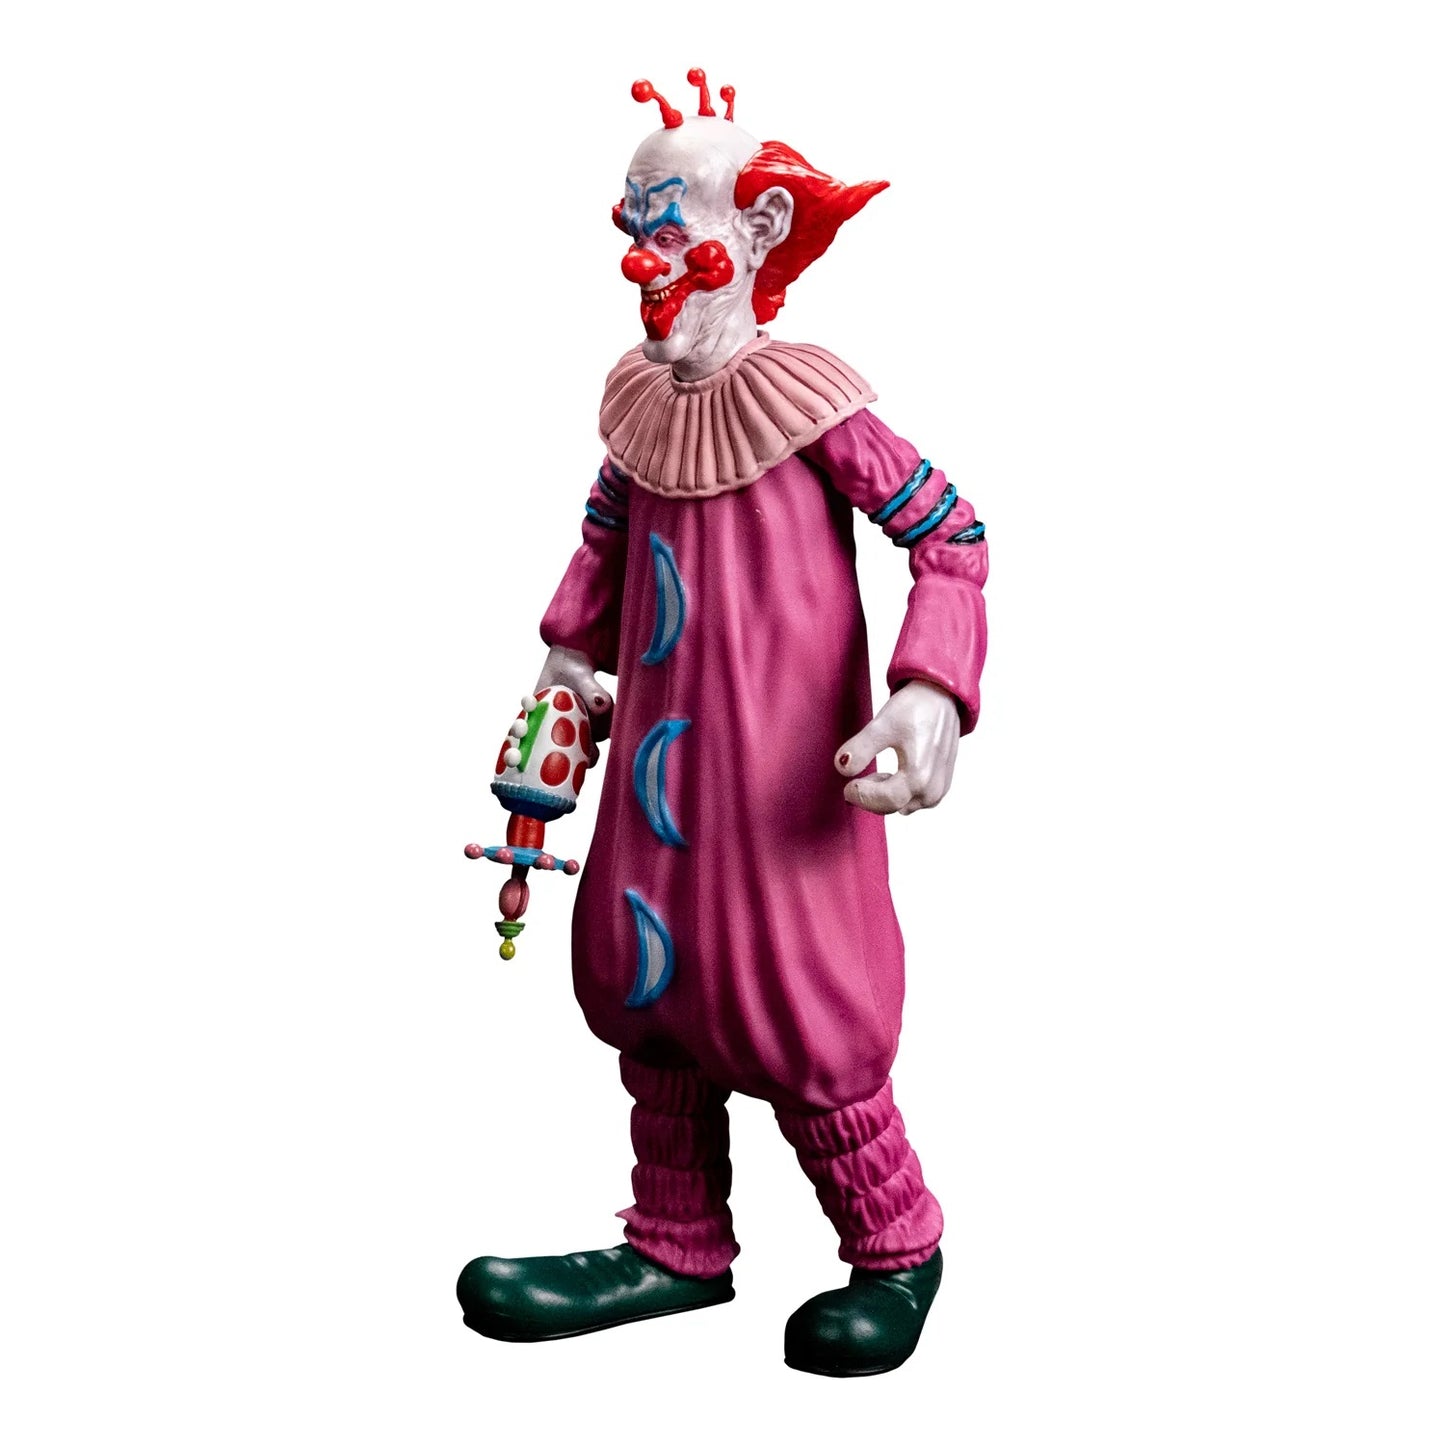 KILLER KLOWNS FROM OUTER SPACE - Slim Trick Or Treat Studios Figure